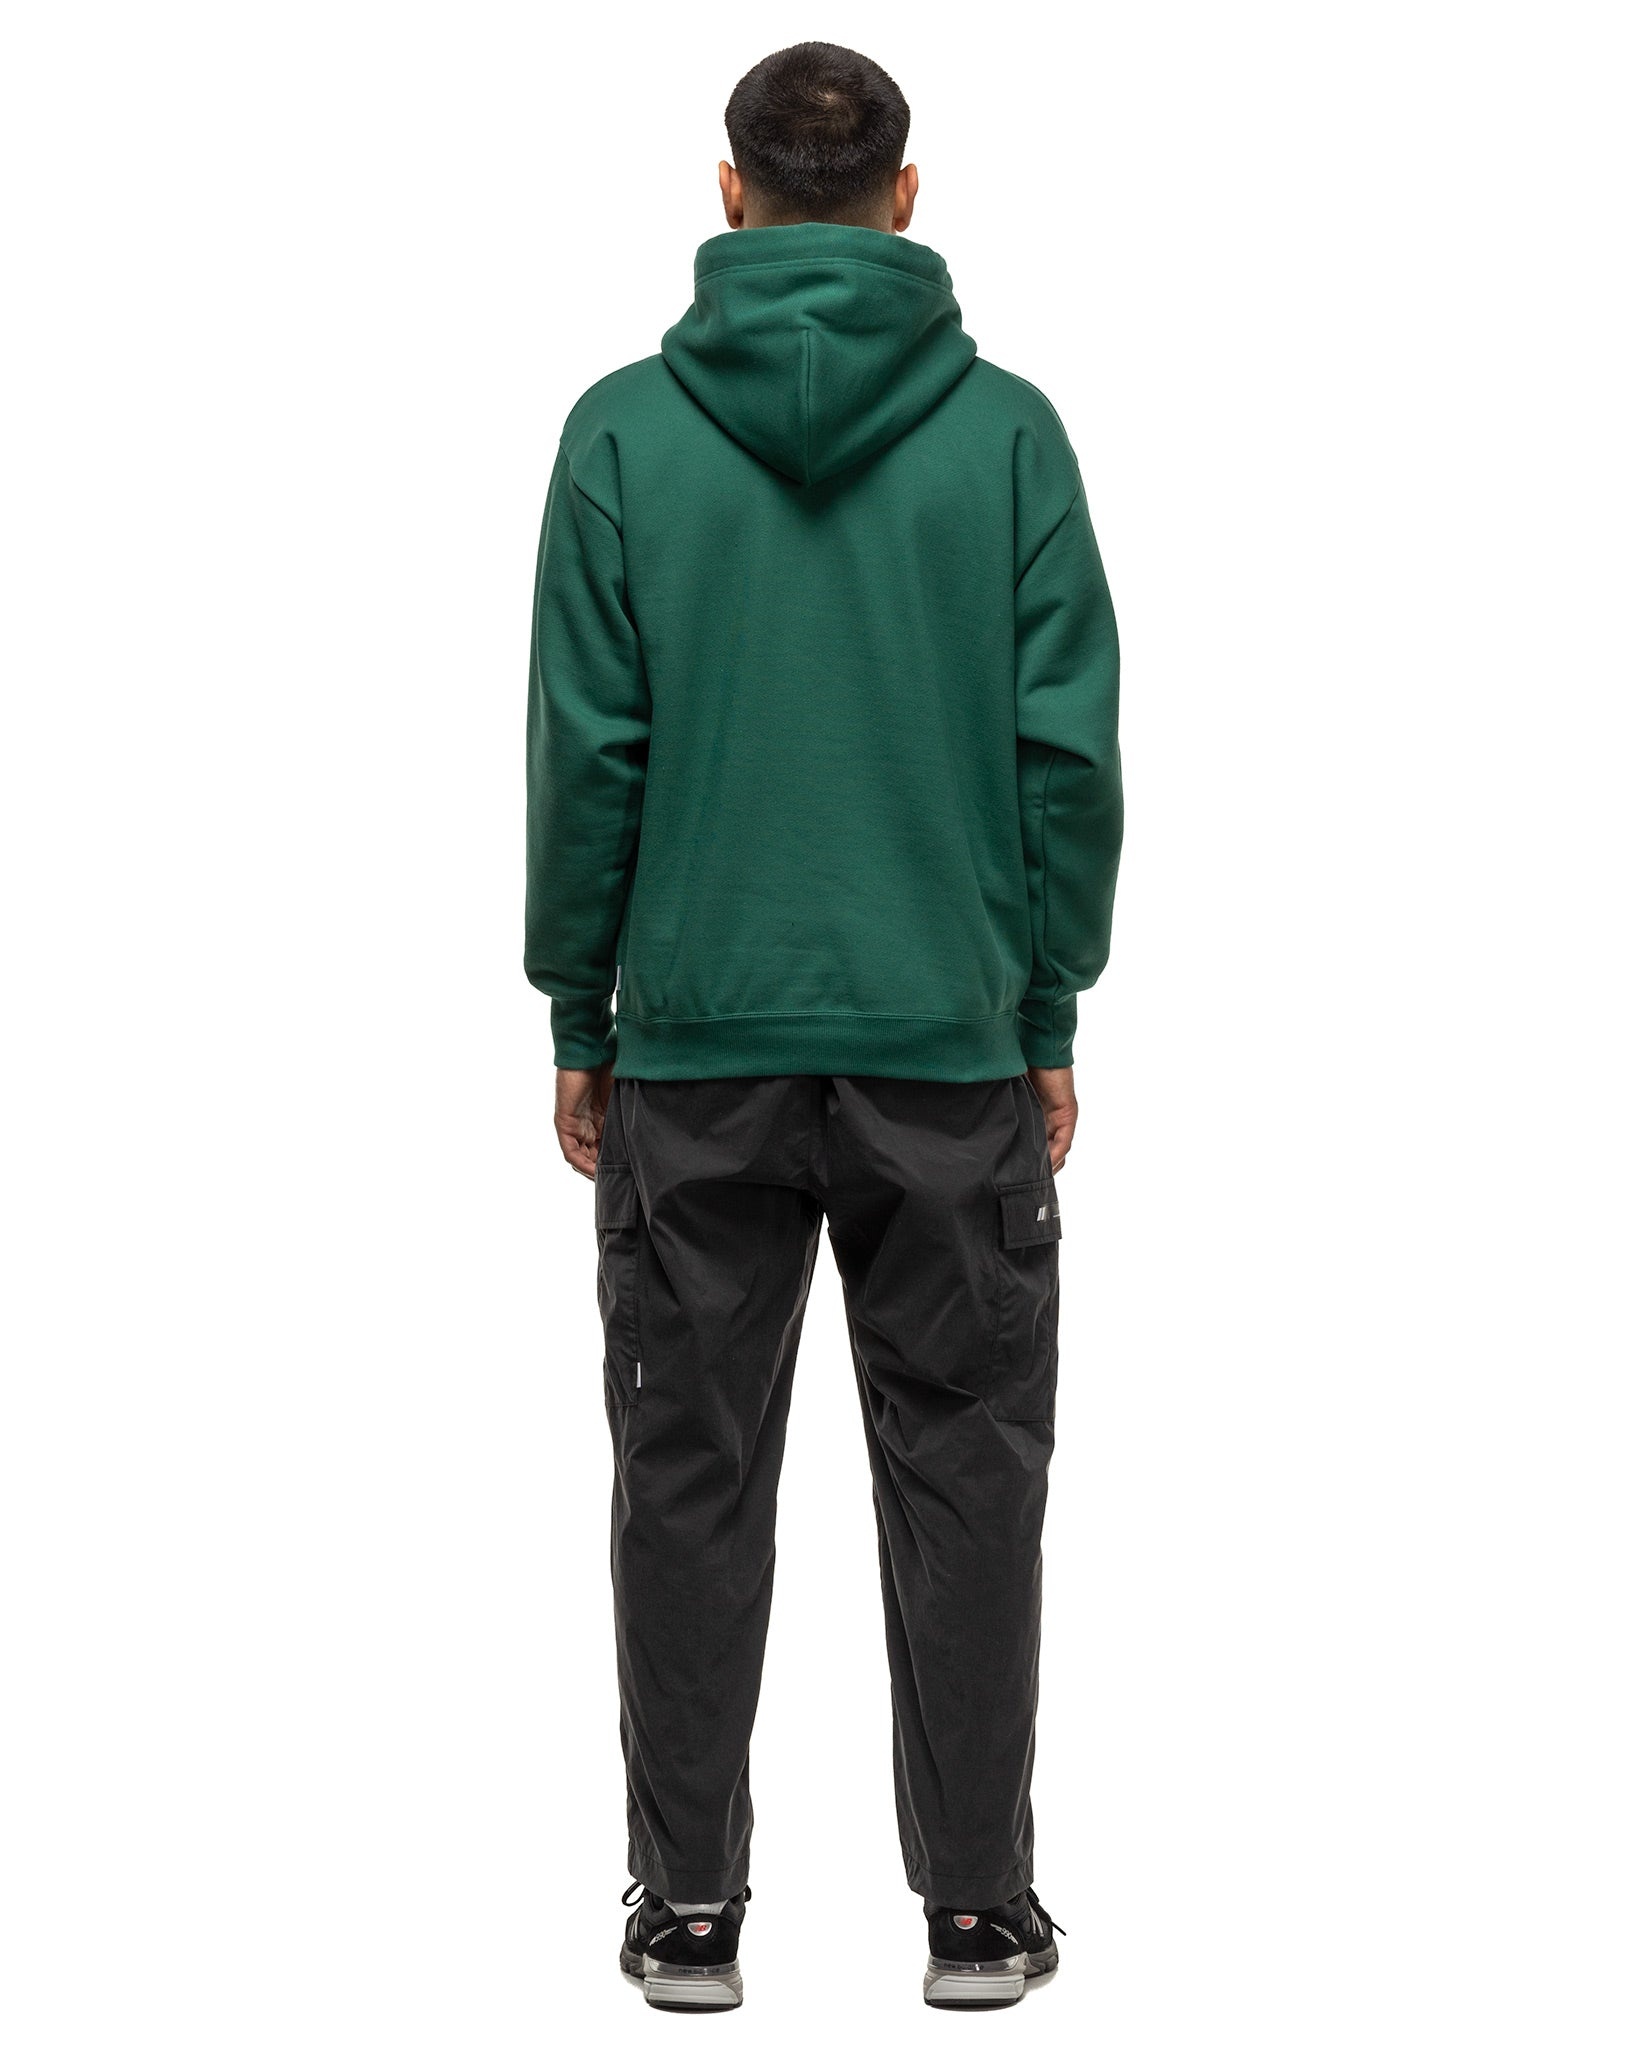 Academy / Hoody / Cotton. College Green - 3